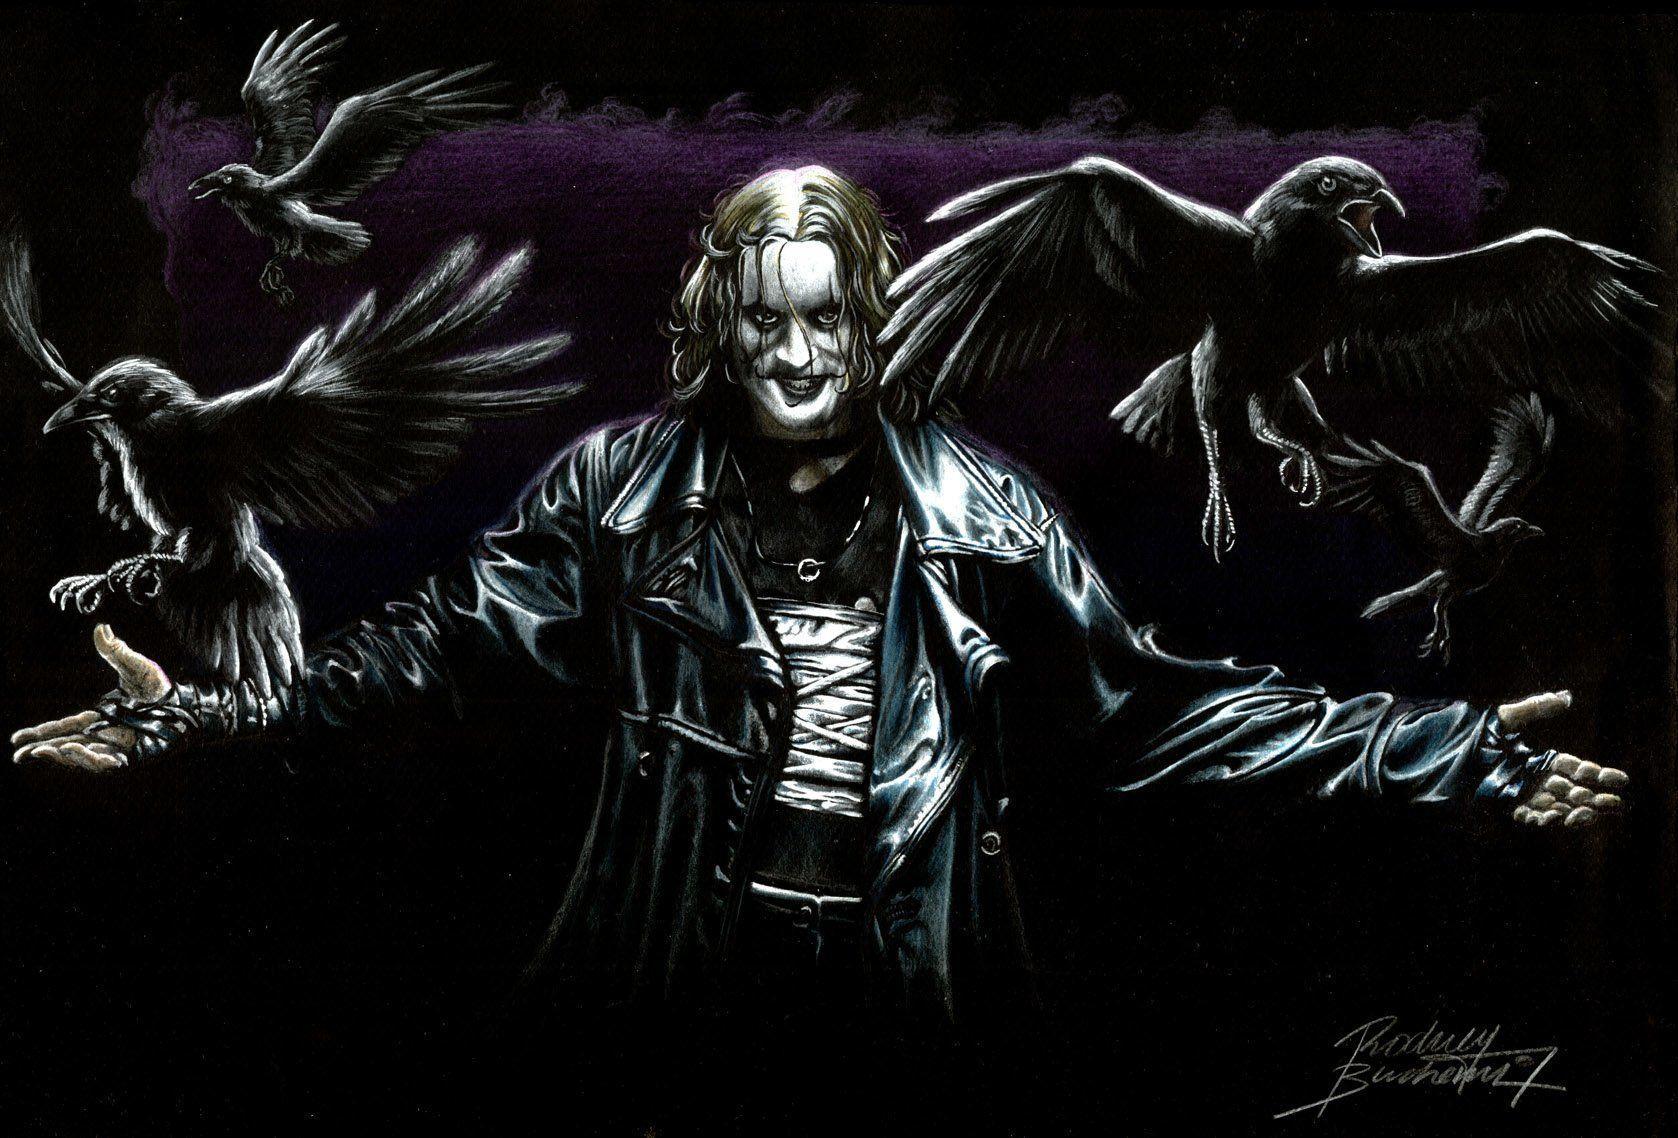 The Crow K Wallpapers Wallpaper Source For Free Awesome Wallpapers Backgrounds